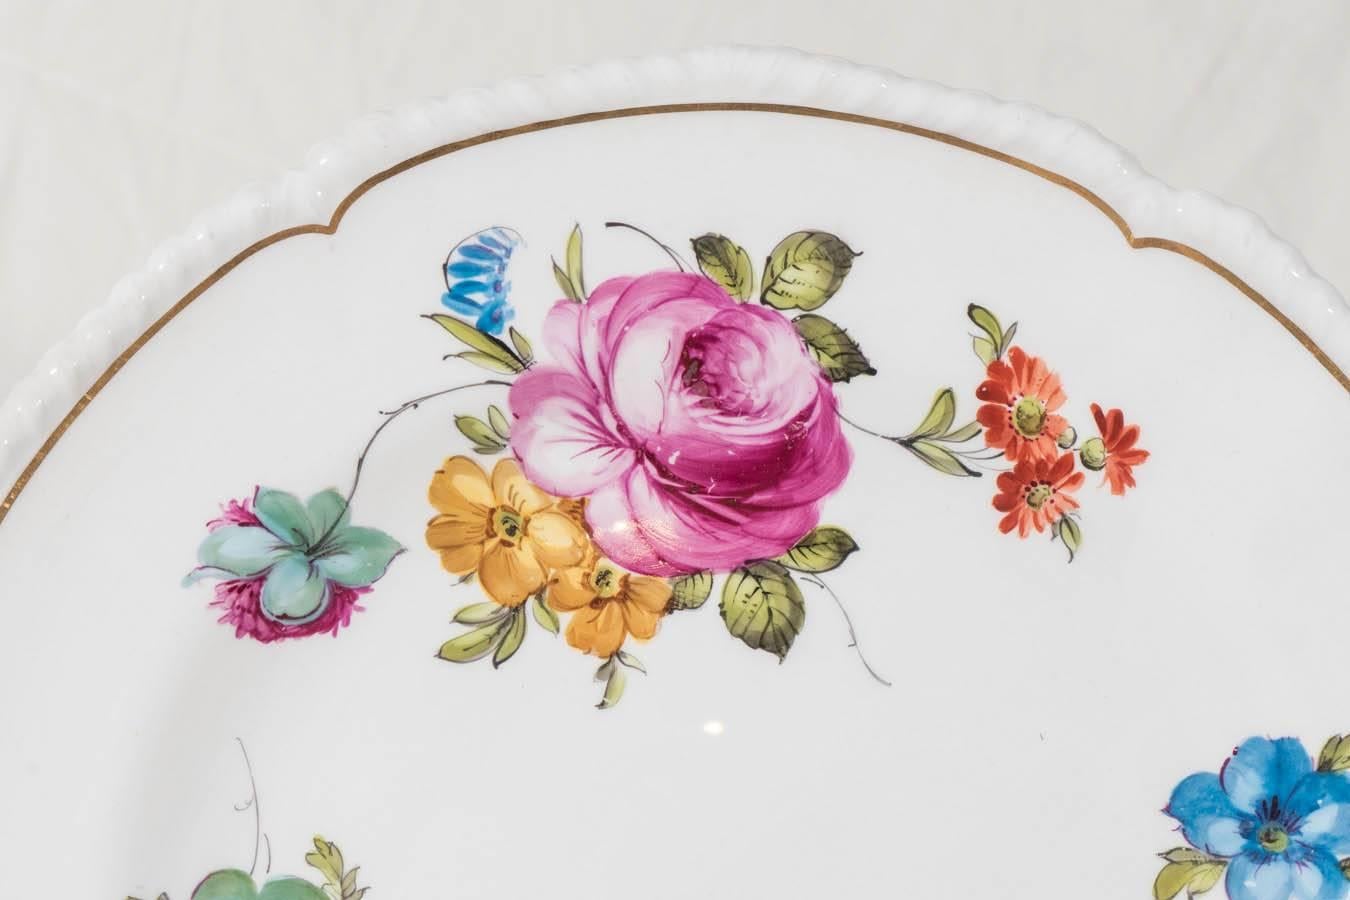 English Antique Porcelain Dishes Each Hand-Painted with Roses on White Porcelain